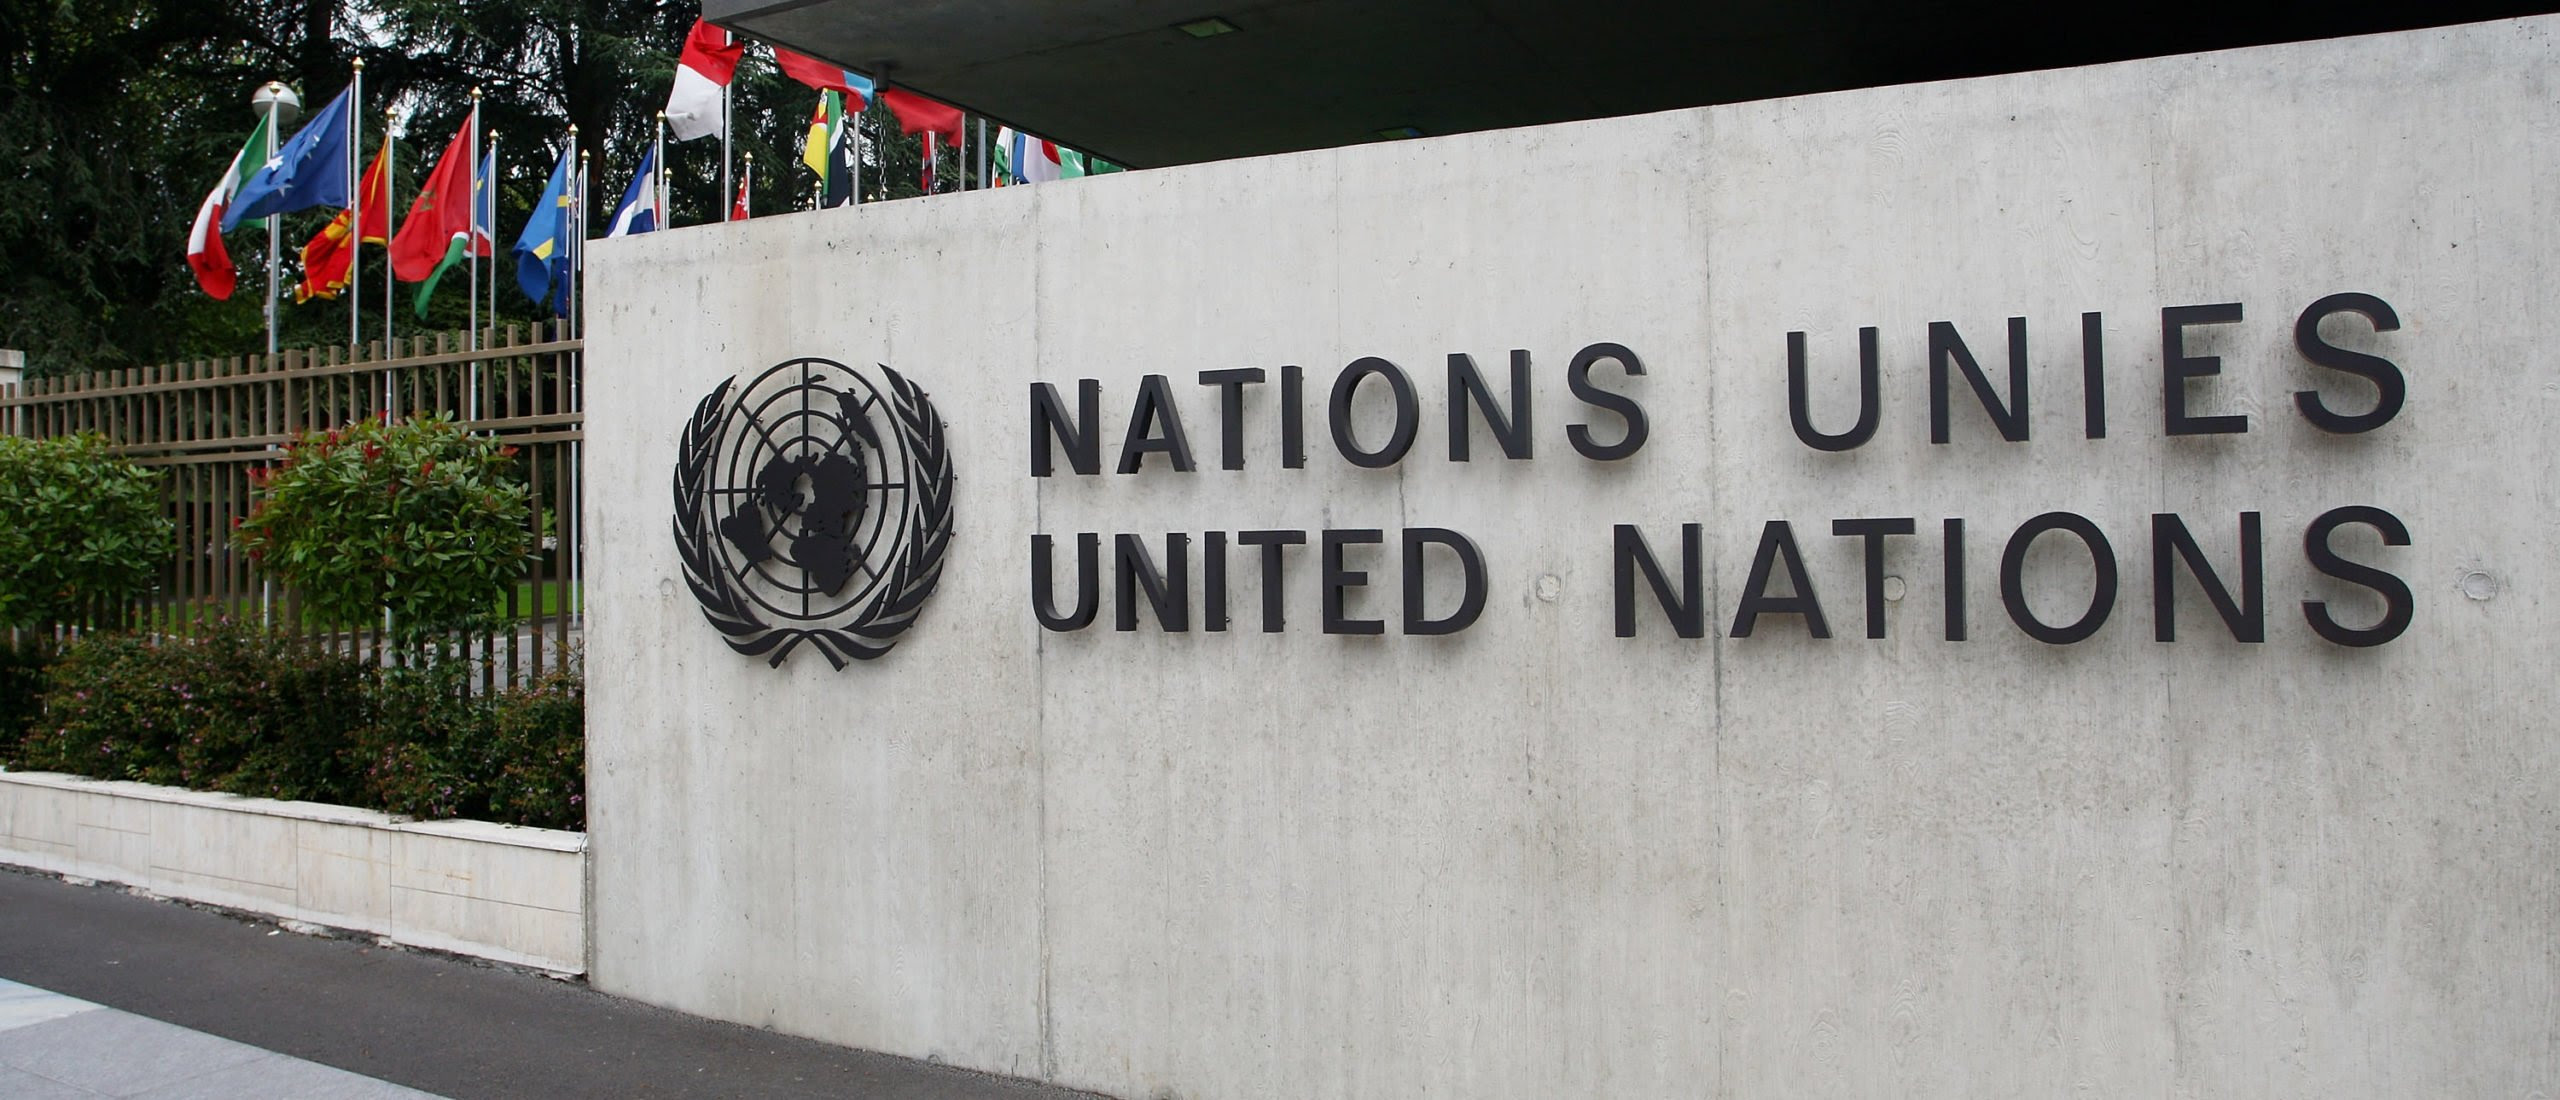 UN Looking To Push Religious Communities To ‘Fully Comply’ With LGBTQ Agenda